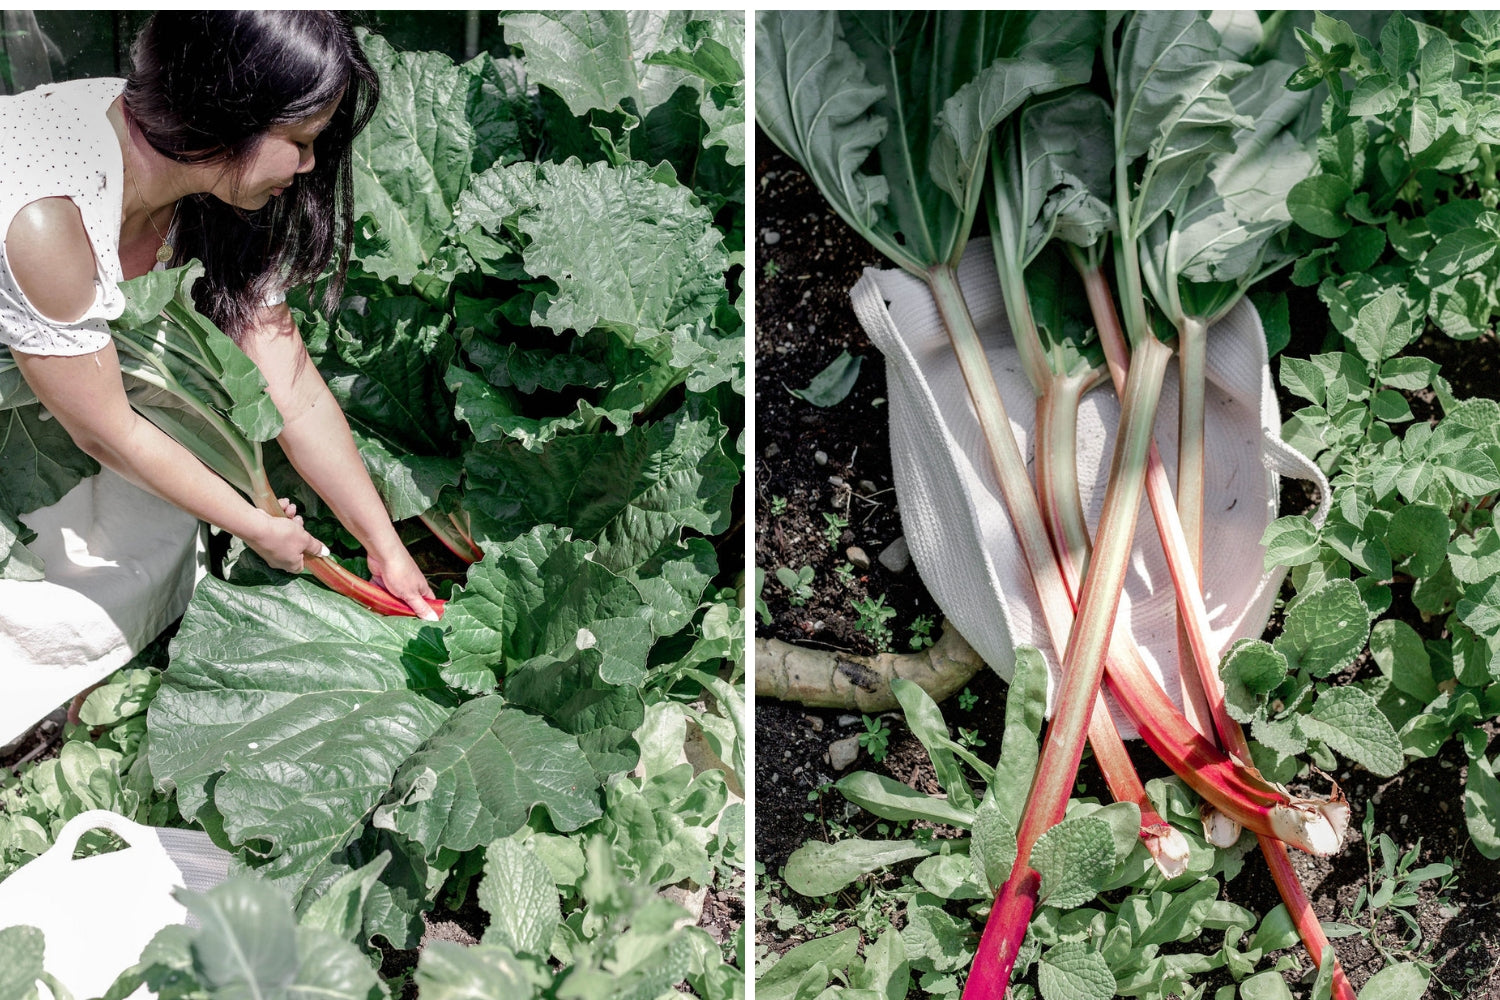 Left image: hands pulling rhubarb stalks from the garden. Right image: rhubarb laying in a garden basket. Right image: